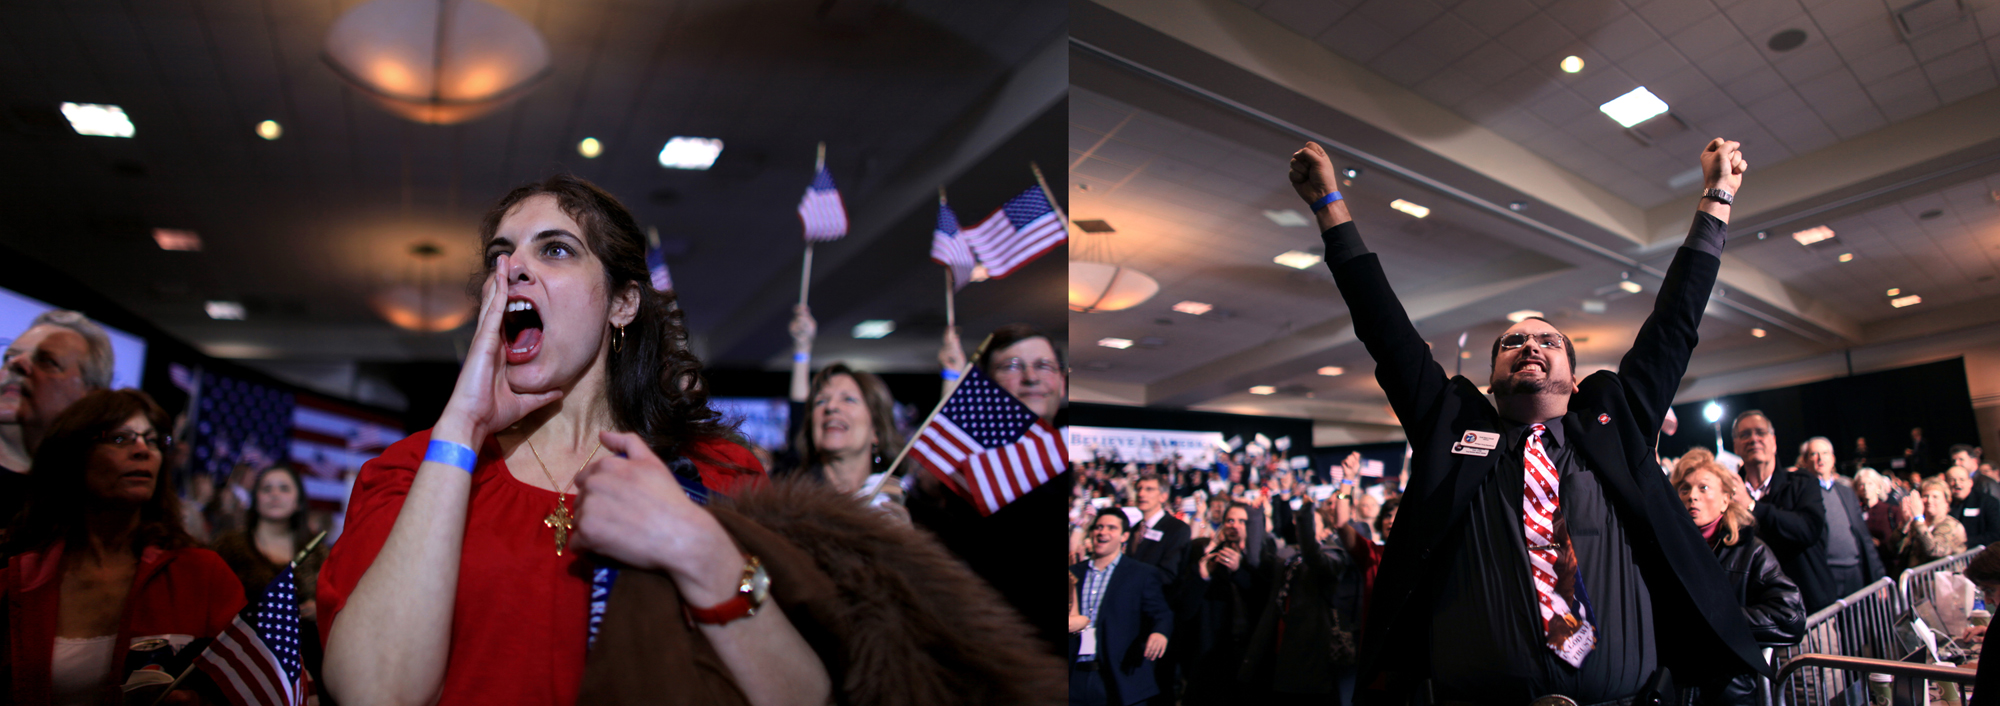 (L-R) Jennifer Harper cheers while watching Republican Presidential candidate Mitt Romney (R-MA) take a slight lead over his rival, Rick Santorum (R-PA) in the battle for primary elections in Romney's home state in Novi, Michigan on Tuesday, February 28, 2012; and Scott Czasak screams out in joy while watching the results of primary elections in the home state of Republican Presidential candidate Mitt Romney (R-MA), as it is announced he has defeated his rival, Rick Santorum (R-PA) in Novi, Michigan on Tuesday, February 28, 2012.  